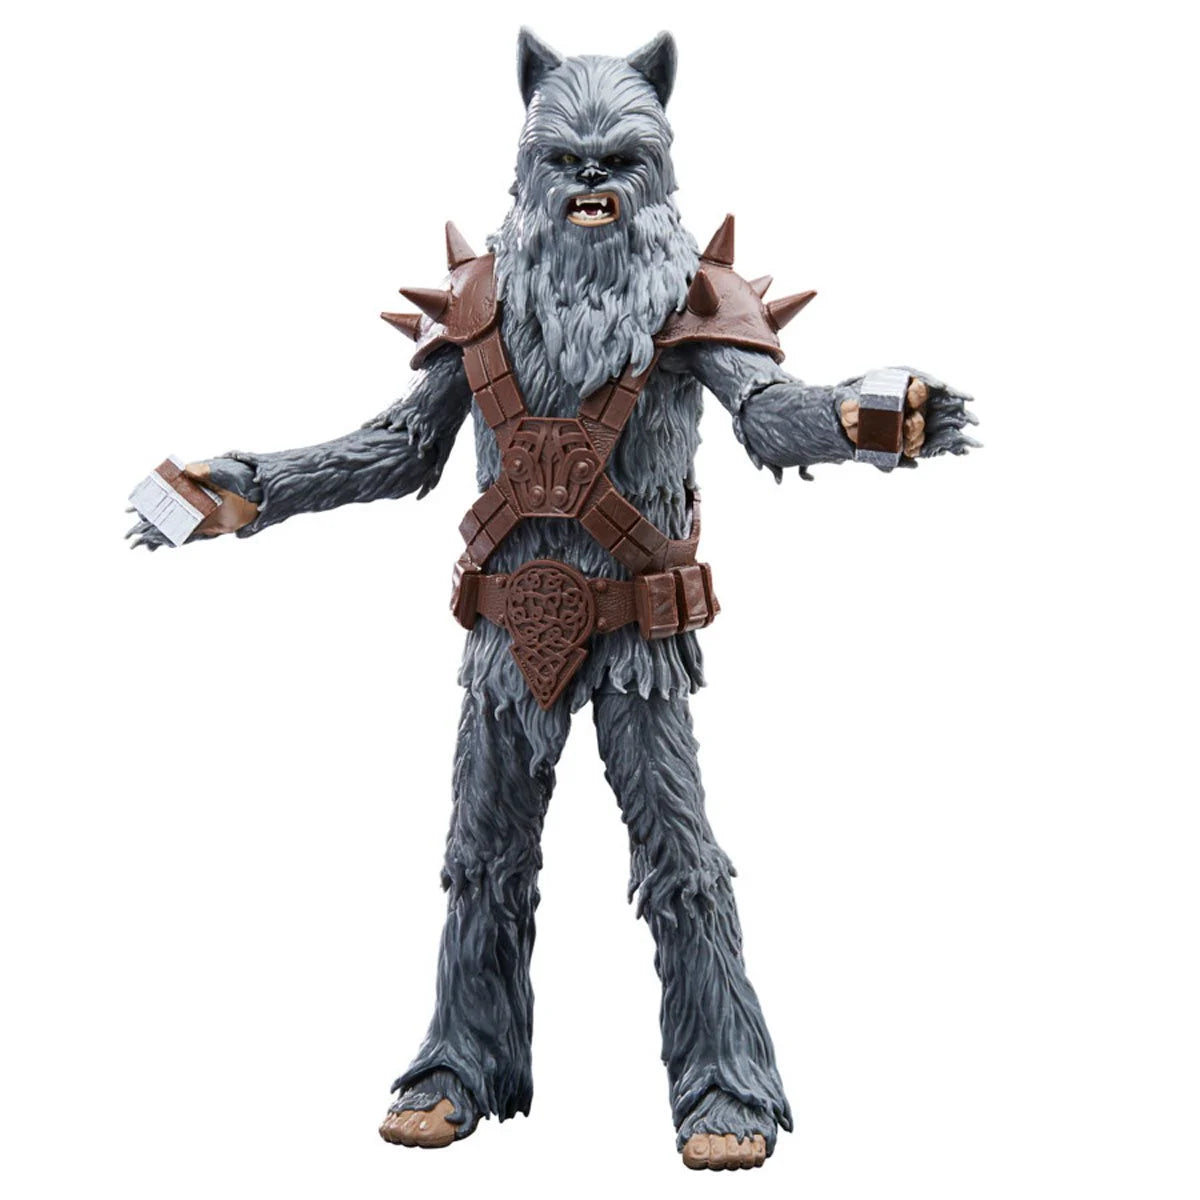 Wookiee Star Wars The Black Series (Halloween Edition) and Bogling 6-Inch Action Figure - Exclusive